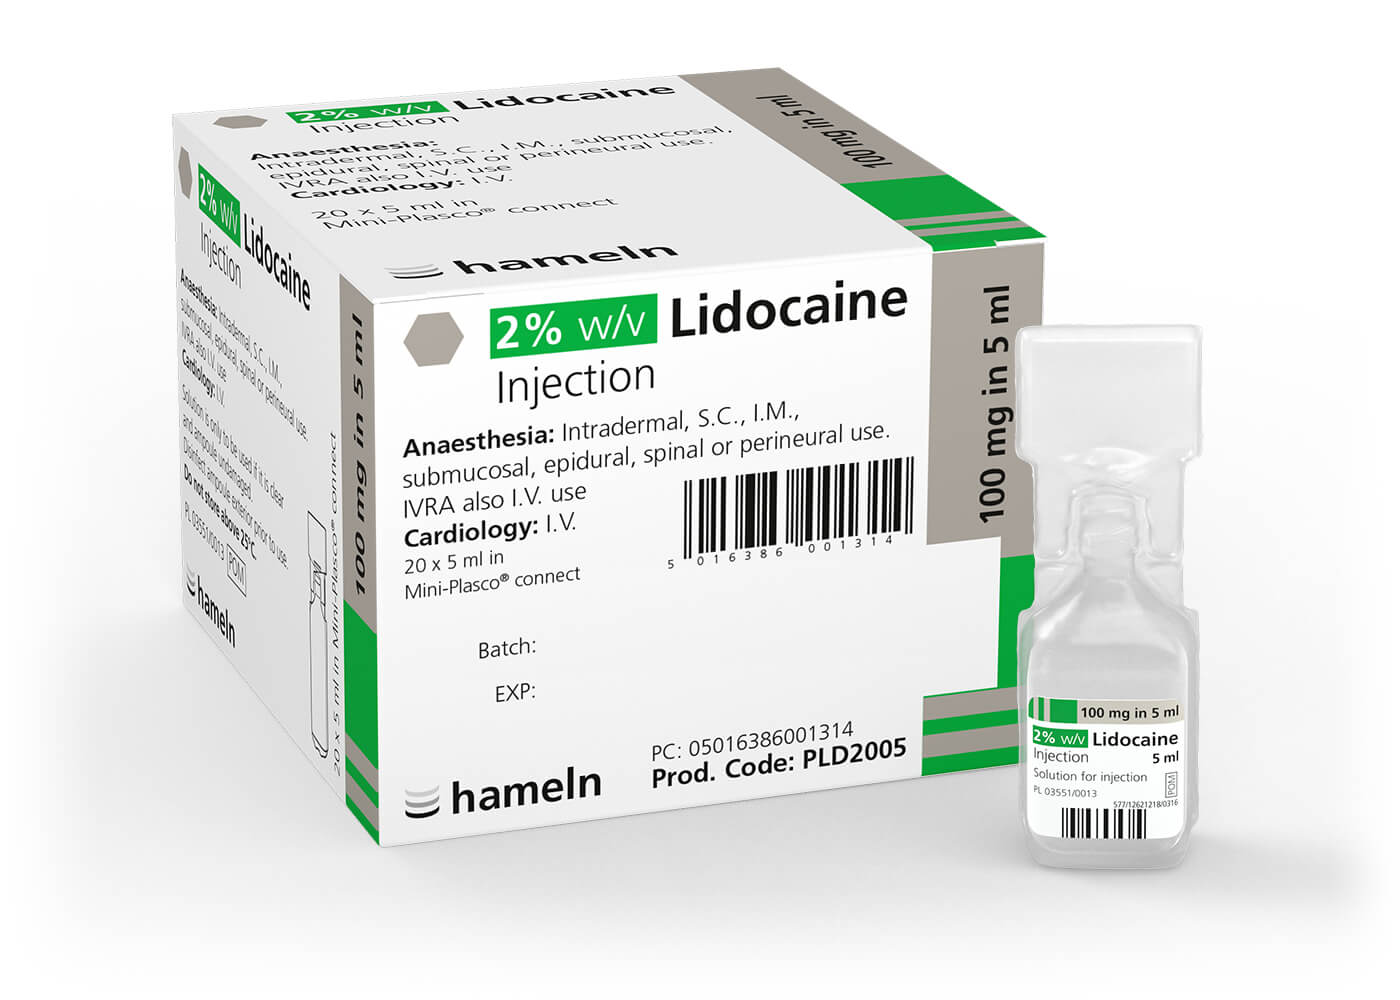 Lidocaine_UK_2pc_100_mg_in_5_ml_Pack_20_St_2021